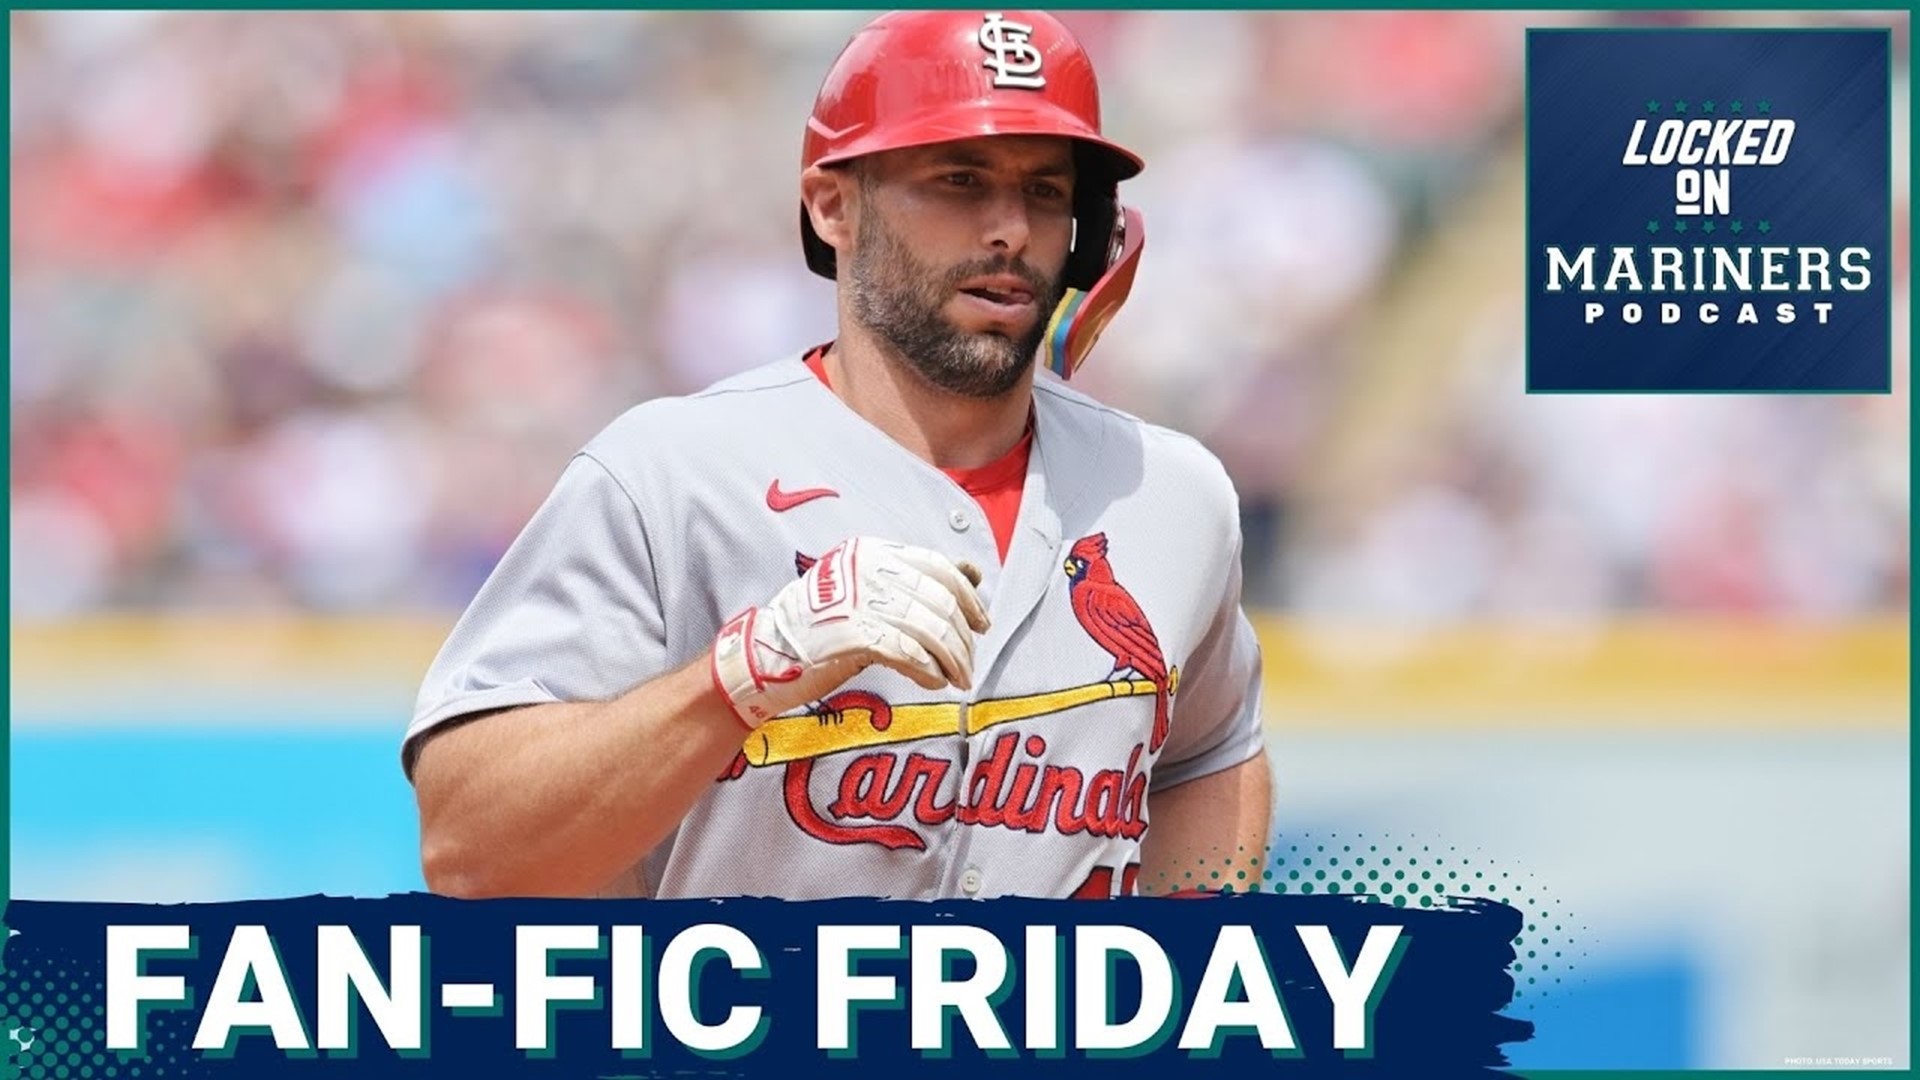 It's time for a listener favorite: Fan Fiction Friday! We asked you to send us your best Seattle Mariners trade ideas and Colby and Ty will grade them.